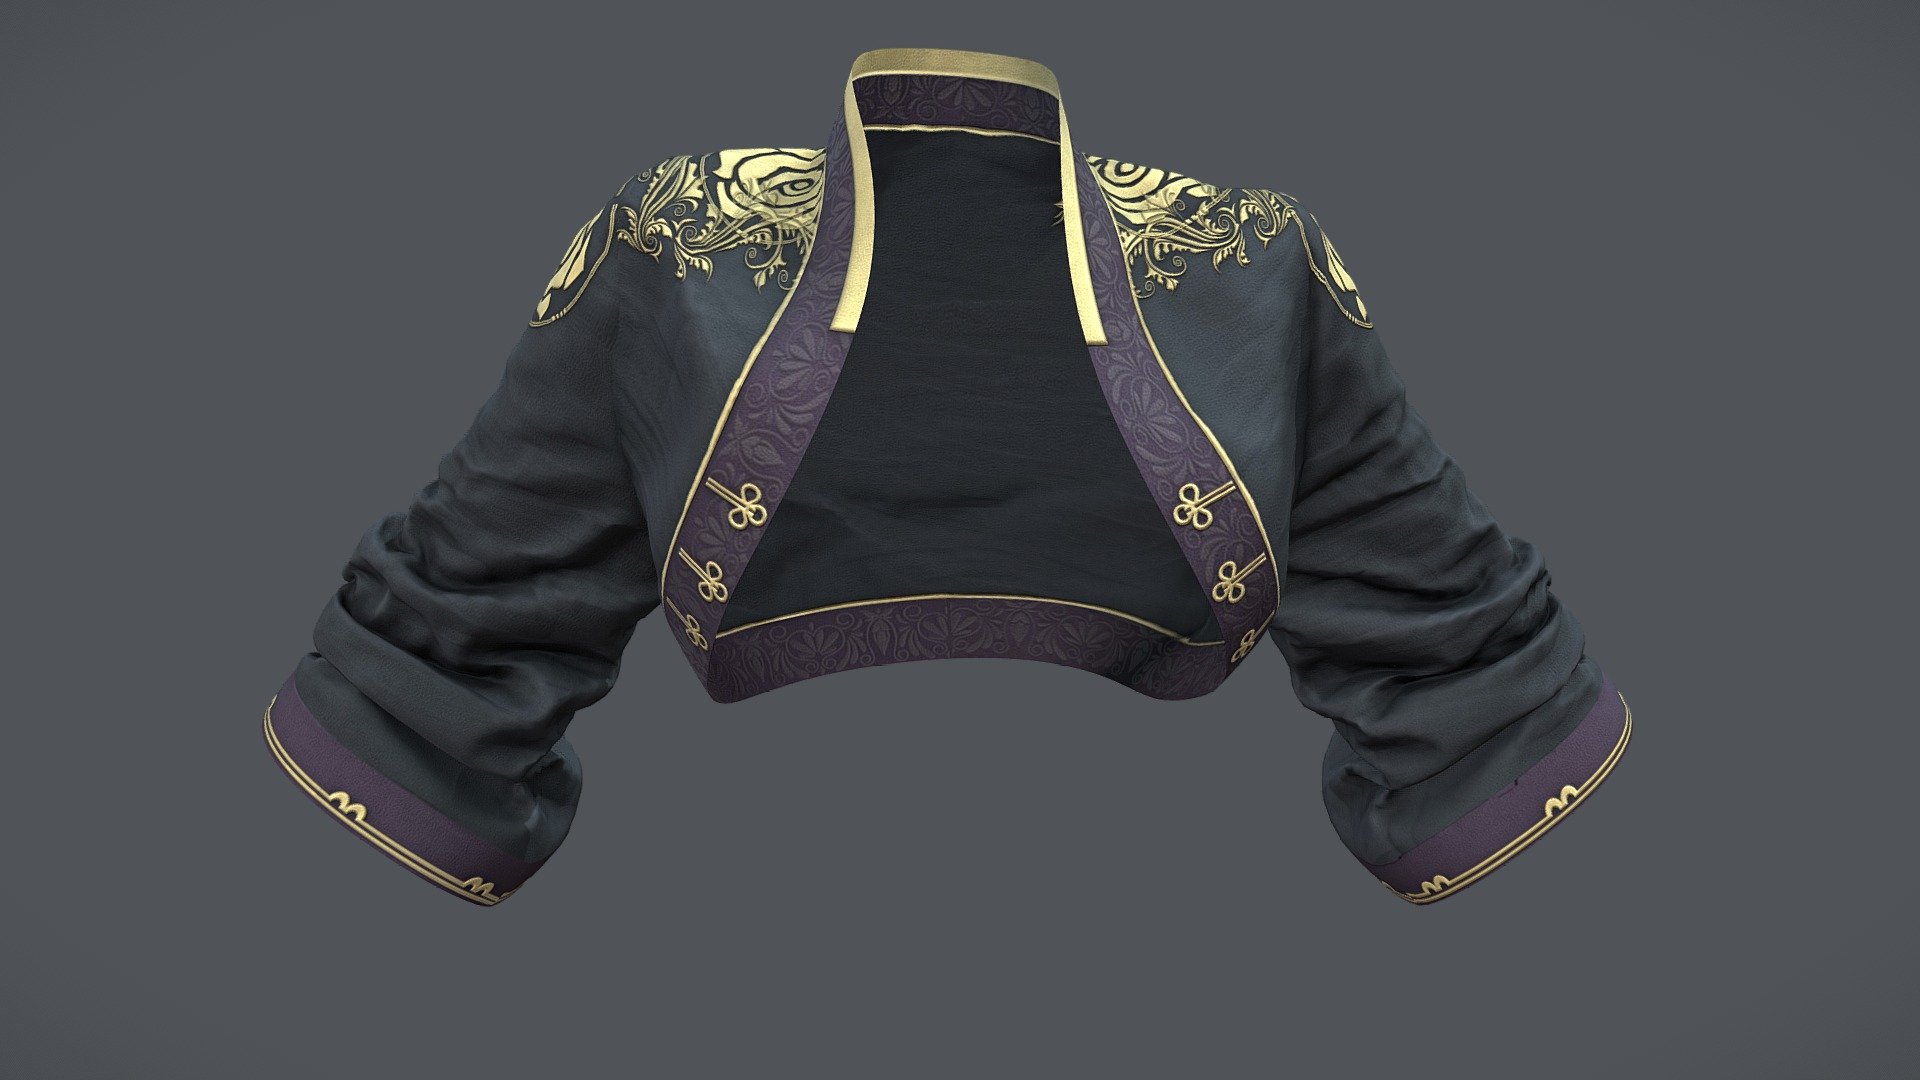 Female Traditional Chinese Japanese Bolero Jacket

Can be fitted to any character

Clean topology

No overlapping smart optimized unwrapped UVs

High-quality realistic textures

FBX, OBJ, gITF, USDZ (request other formats)

PBR or Classic

Type     user:3dia &ldquo;search term